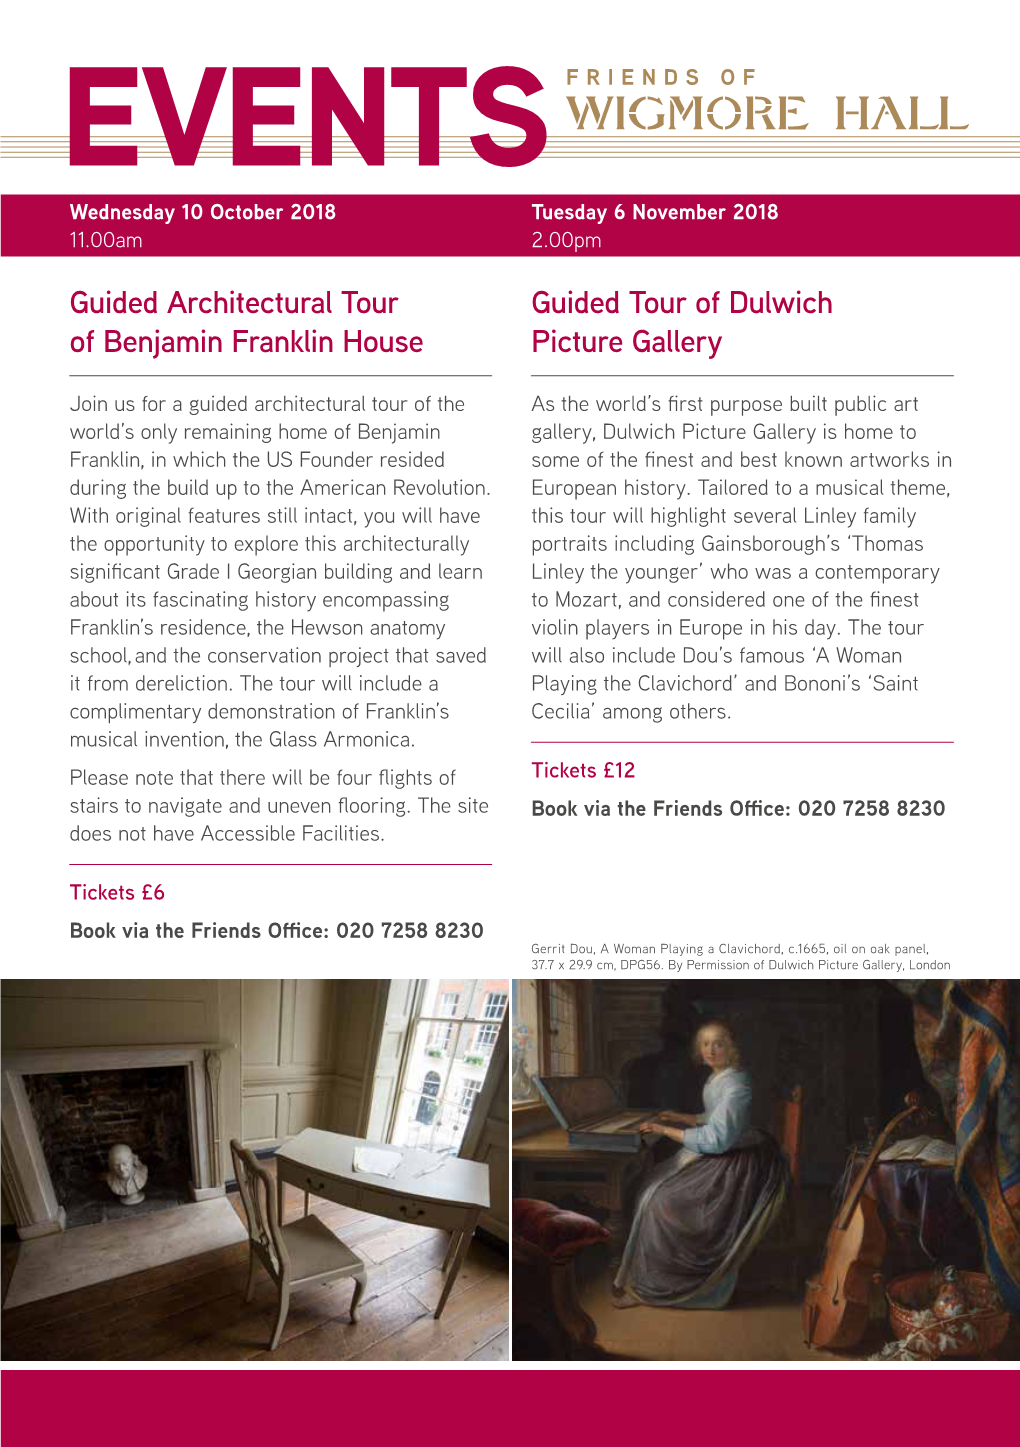 Guided Tour of Dulwich Picture Gallery Guided Architectural Tour of Benjamin Franklin House